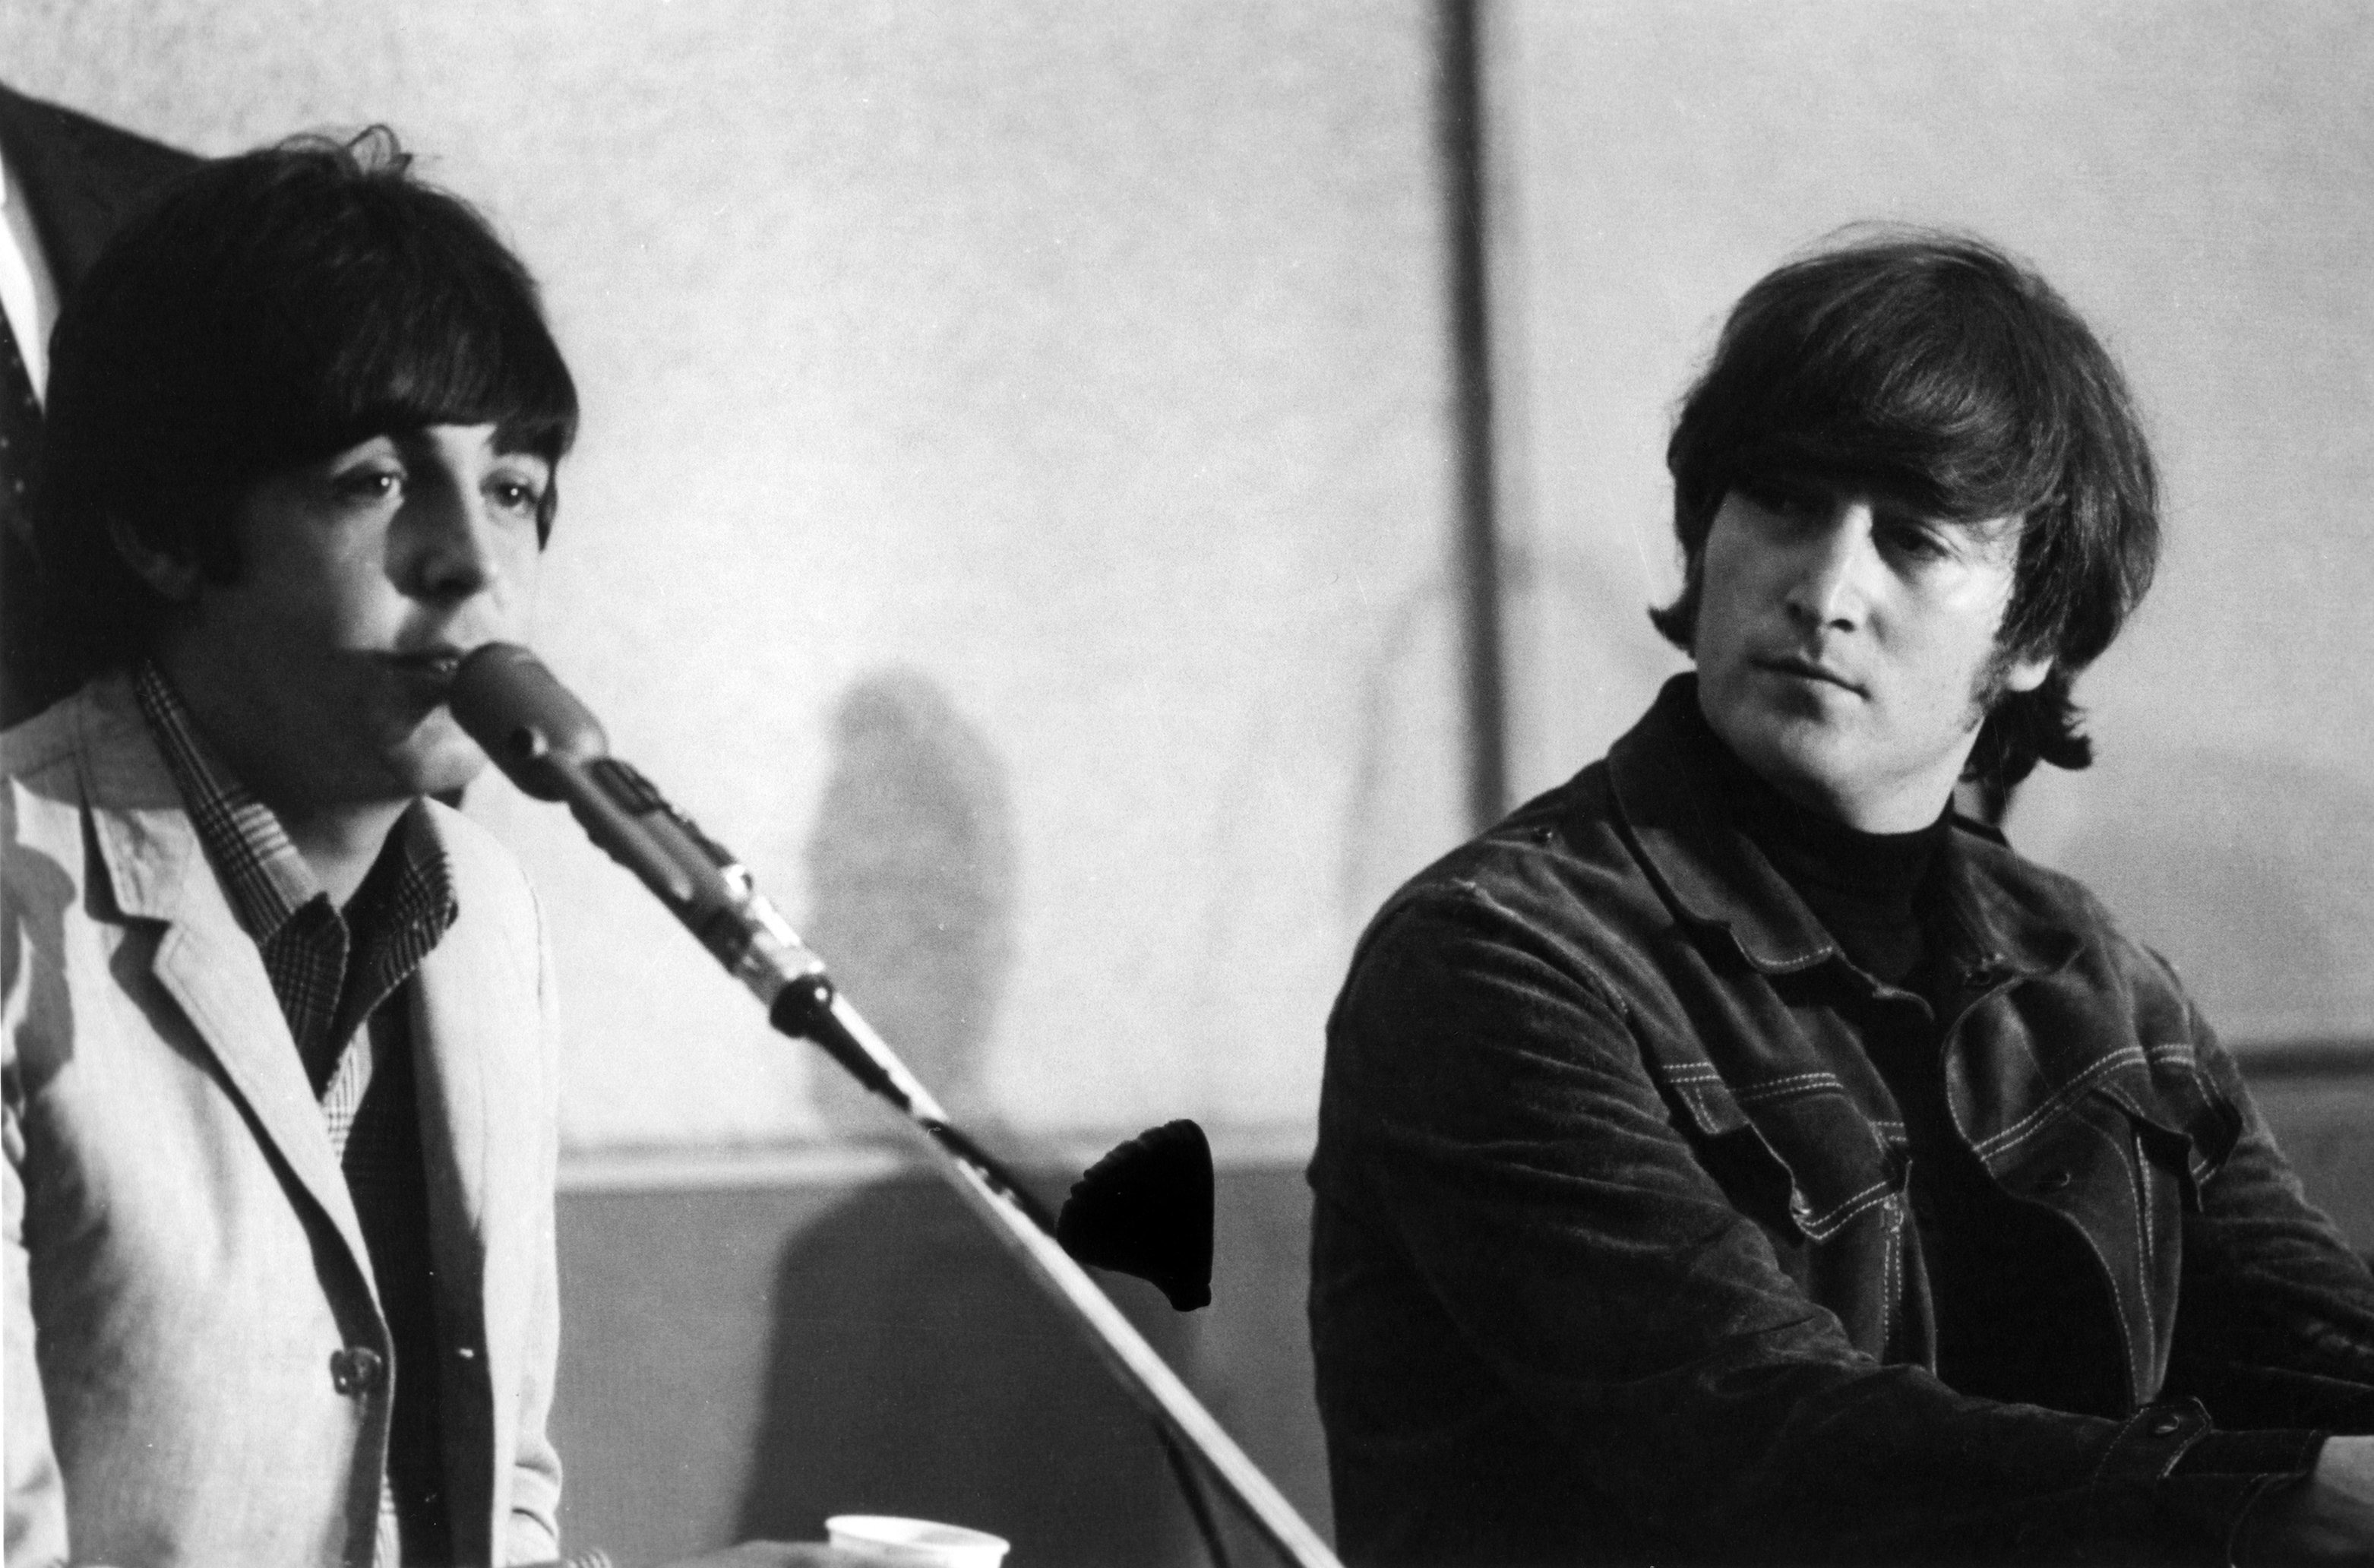 Paul McCartney and John Lennon of The Beatles at a press conference for their album 'Help!'